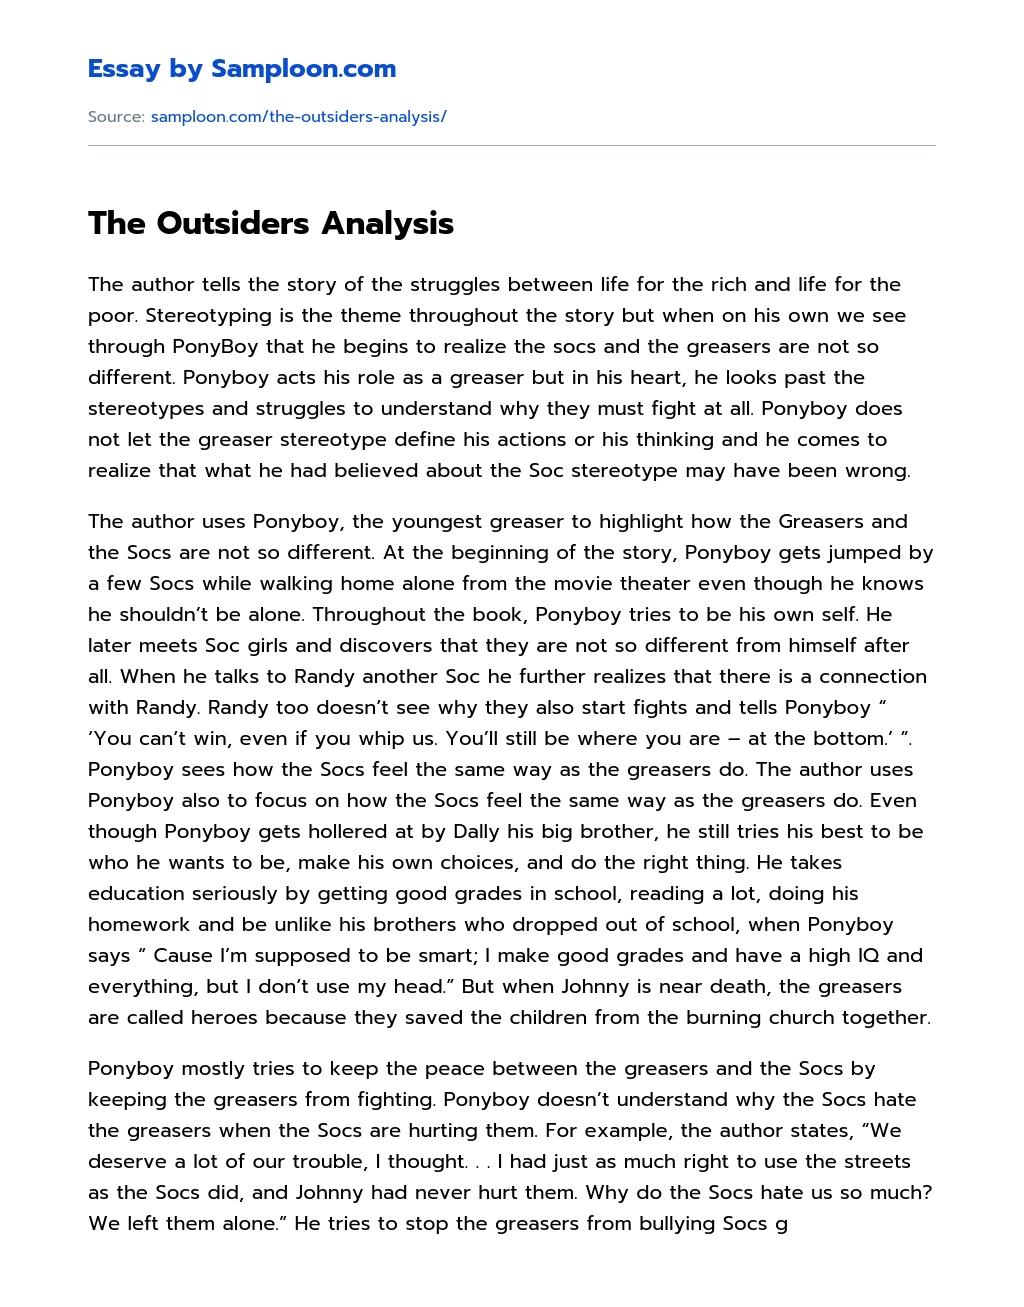 The Outsiders Analysis essay